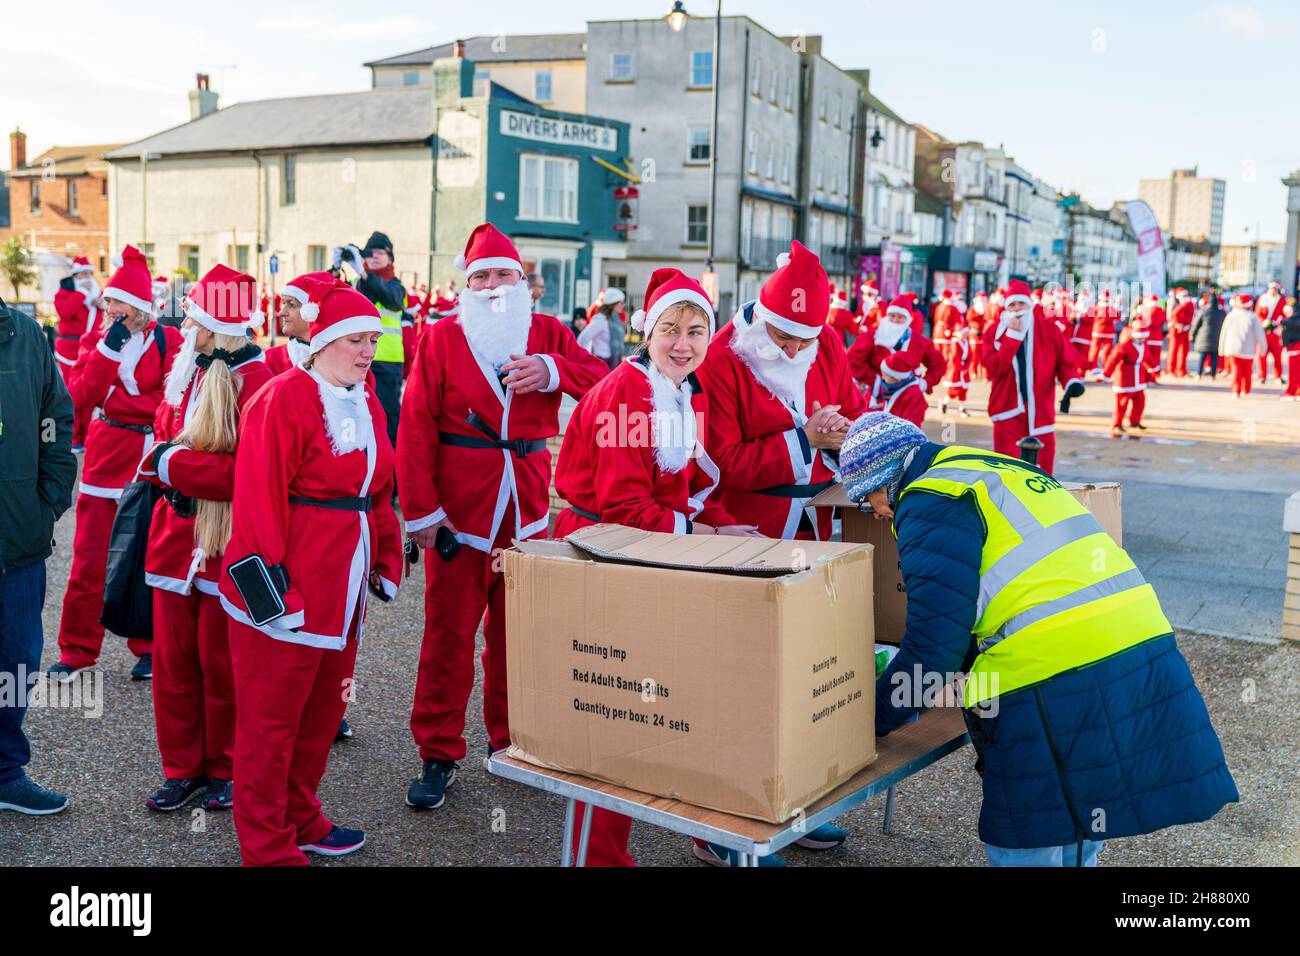 Lines of people, all dressed as Father Christmas, queuing up to register for a place in the 'Santa's on the Bay' charity fun run in aid of the Pilgrims hospices on the seafront at Herne Bay in Kent on a bitterly cold morning in late November. Stock Photo